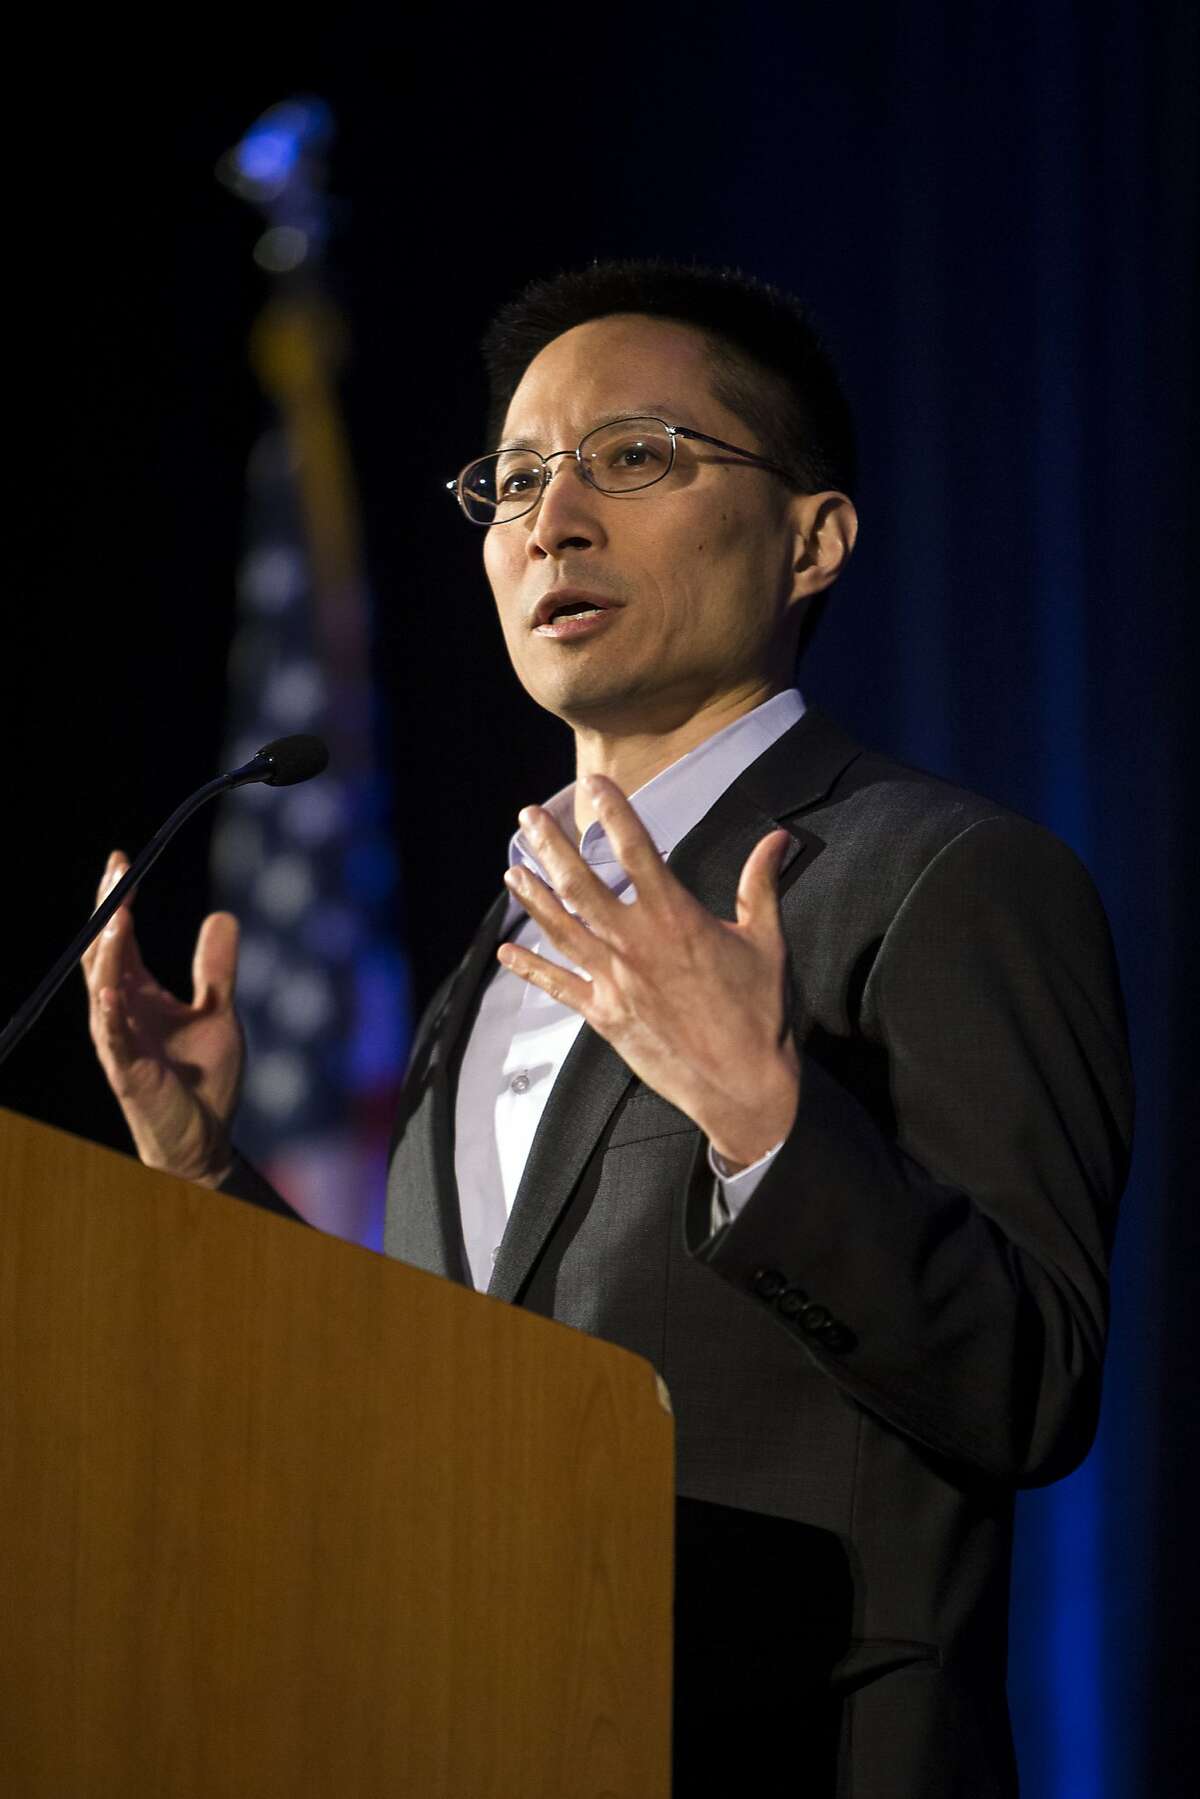 Eric Liu discusses the Background Check Initiative at the Washington Alliance for Gun Responsibility Luncheon Thursday, May 30, 2013, in the Grand Ballroom of the Seattle Westin Hotel in downtown Seattle. (Jordan Stead, seattlepi.com)